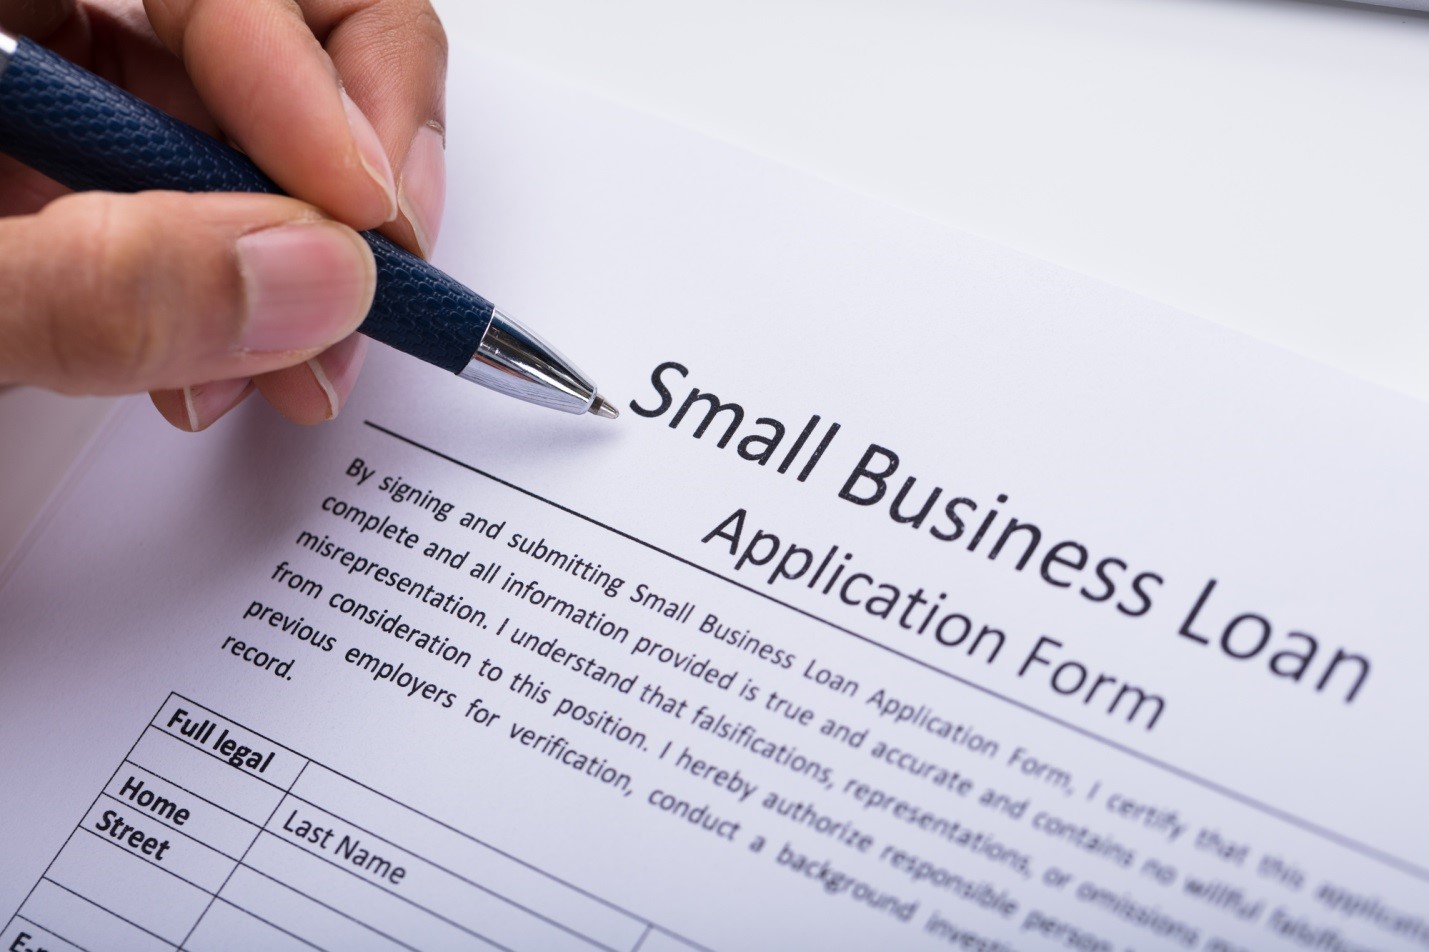 Say Goodbye to Bankers: 5 Small Business Loans to Apply for in 2019